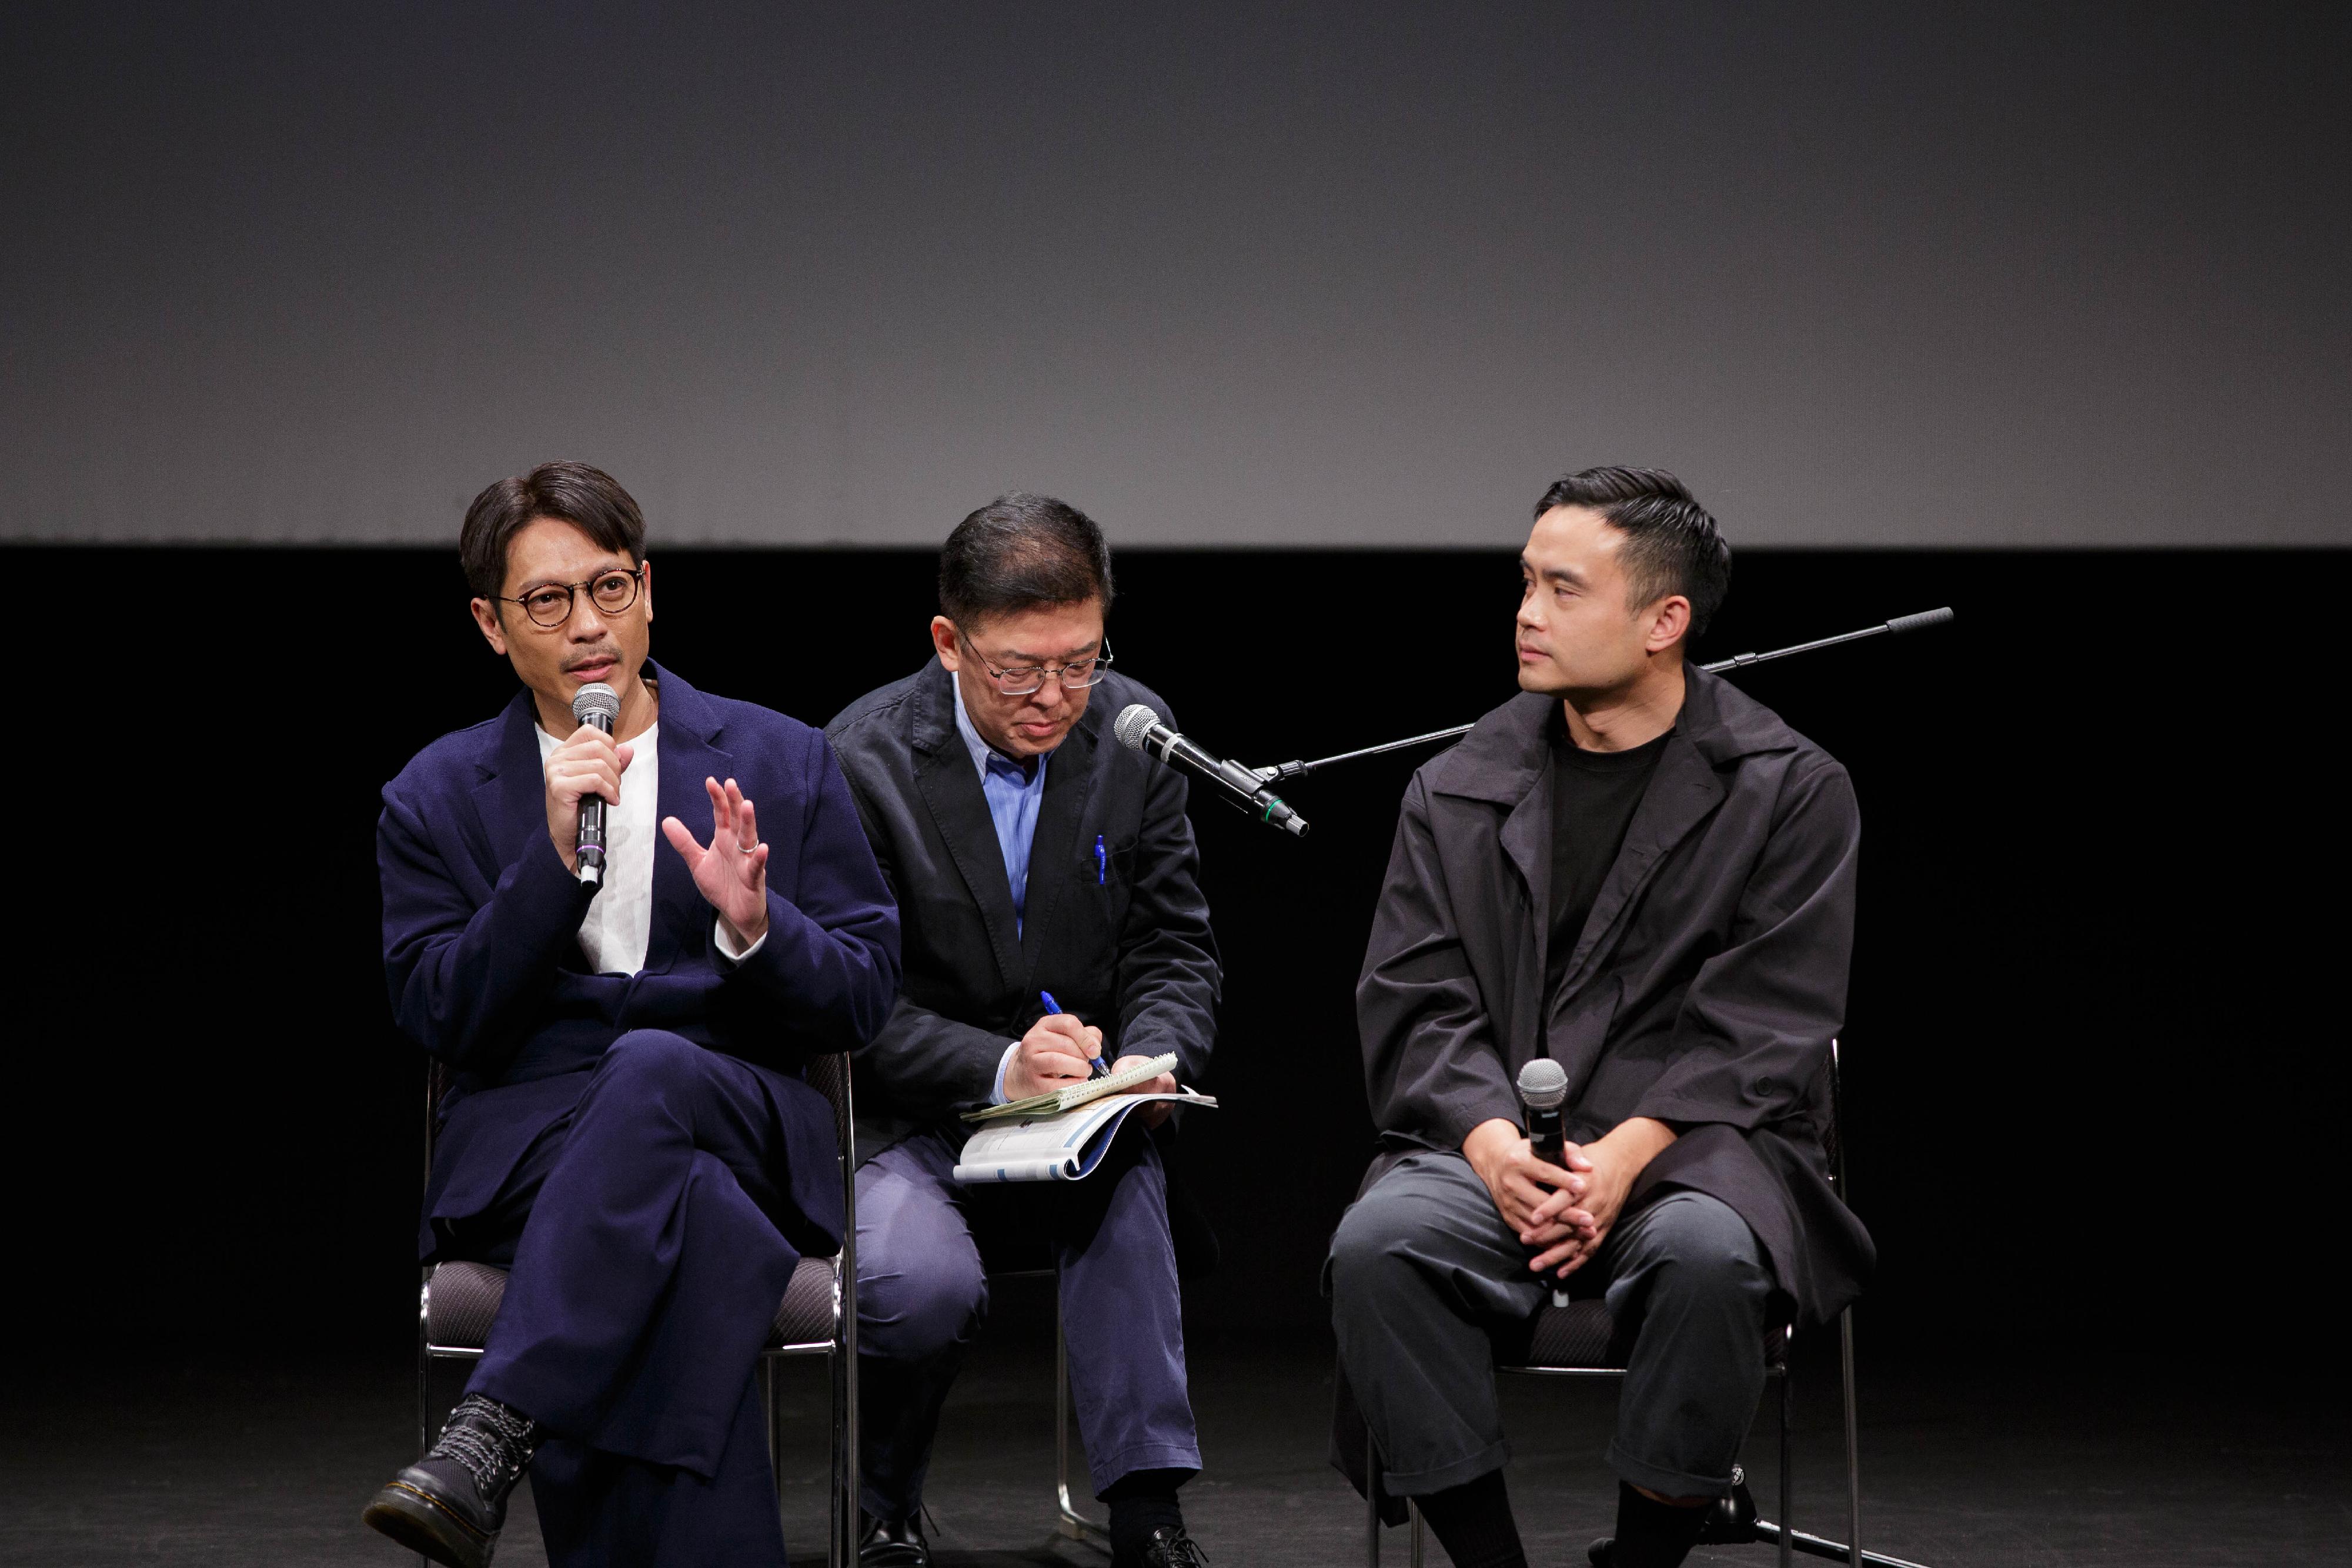 The "Hong Kong Gala Screening" featuring the Hong Kong film "Lost Love" was held in Osaka, Japan, tonight (March 16). Photo shows director Ka Sing-fung (right) and actor Alan Luk (left) of "Lost Love" participating in a sharing session with the audience after the screening.